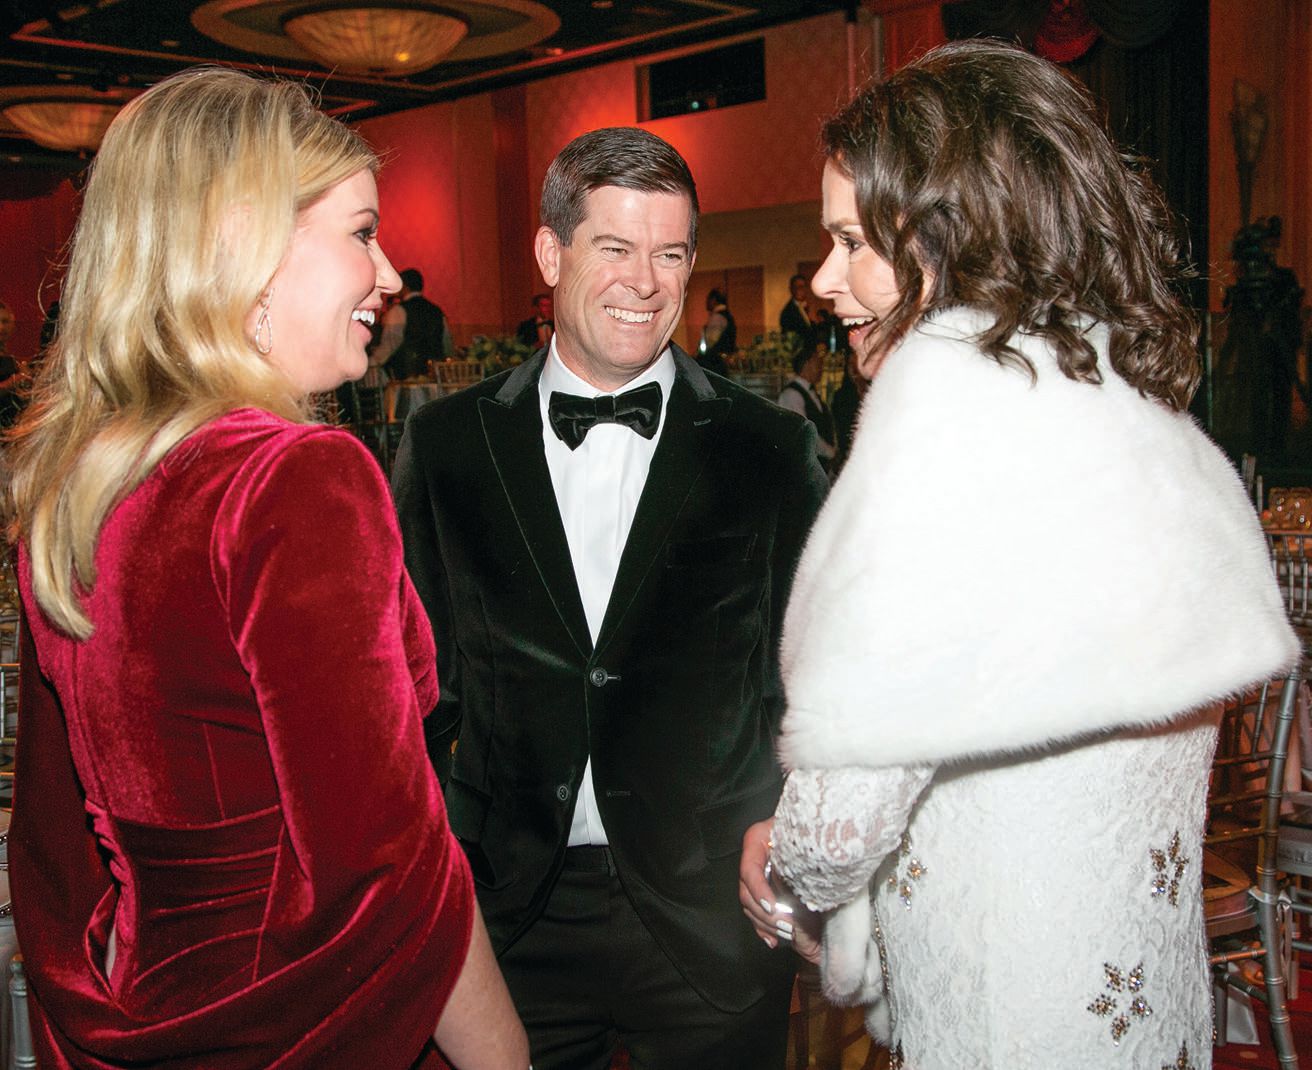 Children’s Champion honorees Jenny and Jeff Gross chatted with Kimberly C. Cripe, president and CEO of CHOC Children’s, at the CHOC Children’s Gala. PHOTO BY CARLA RHEA